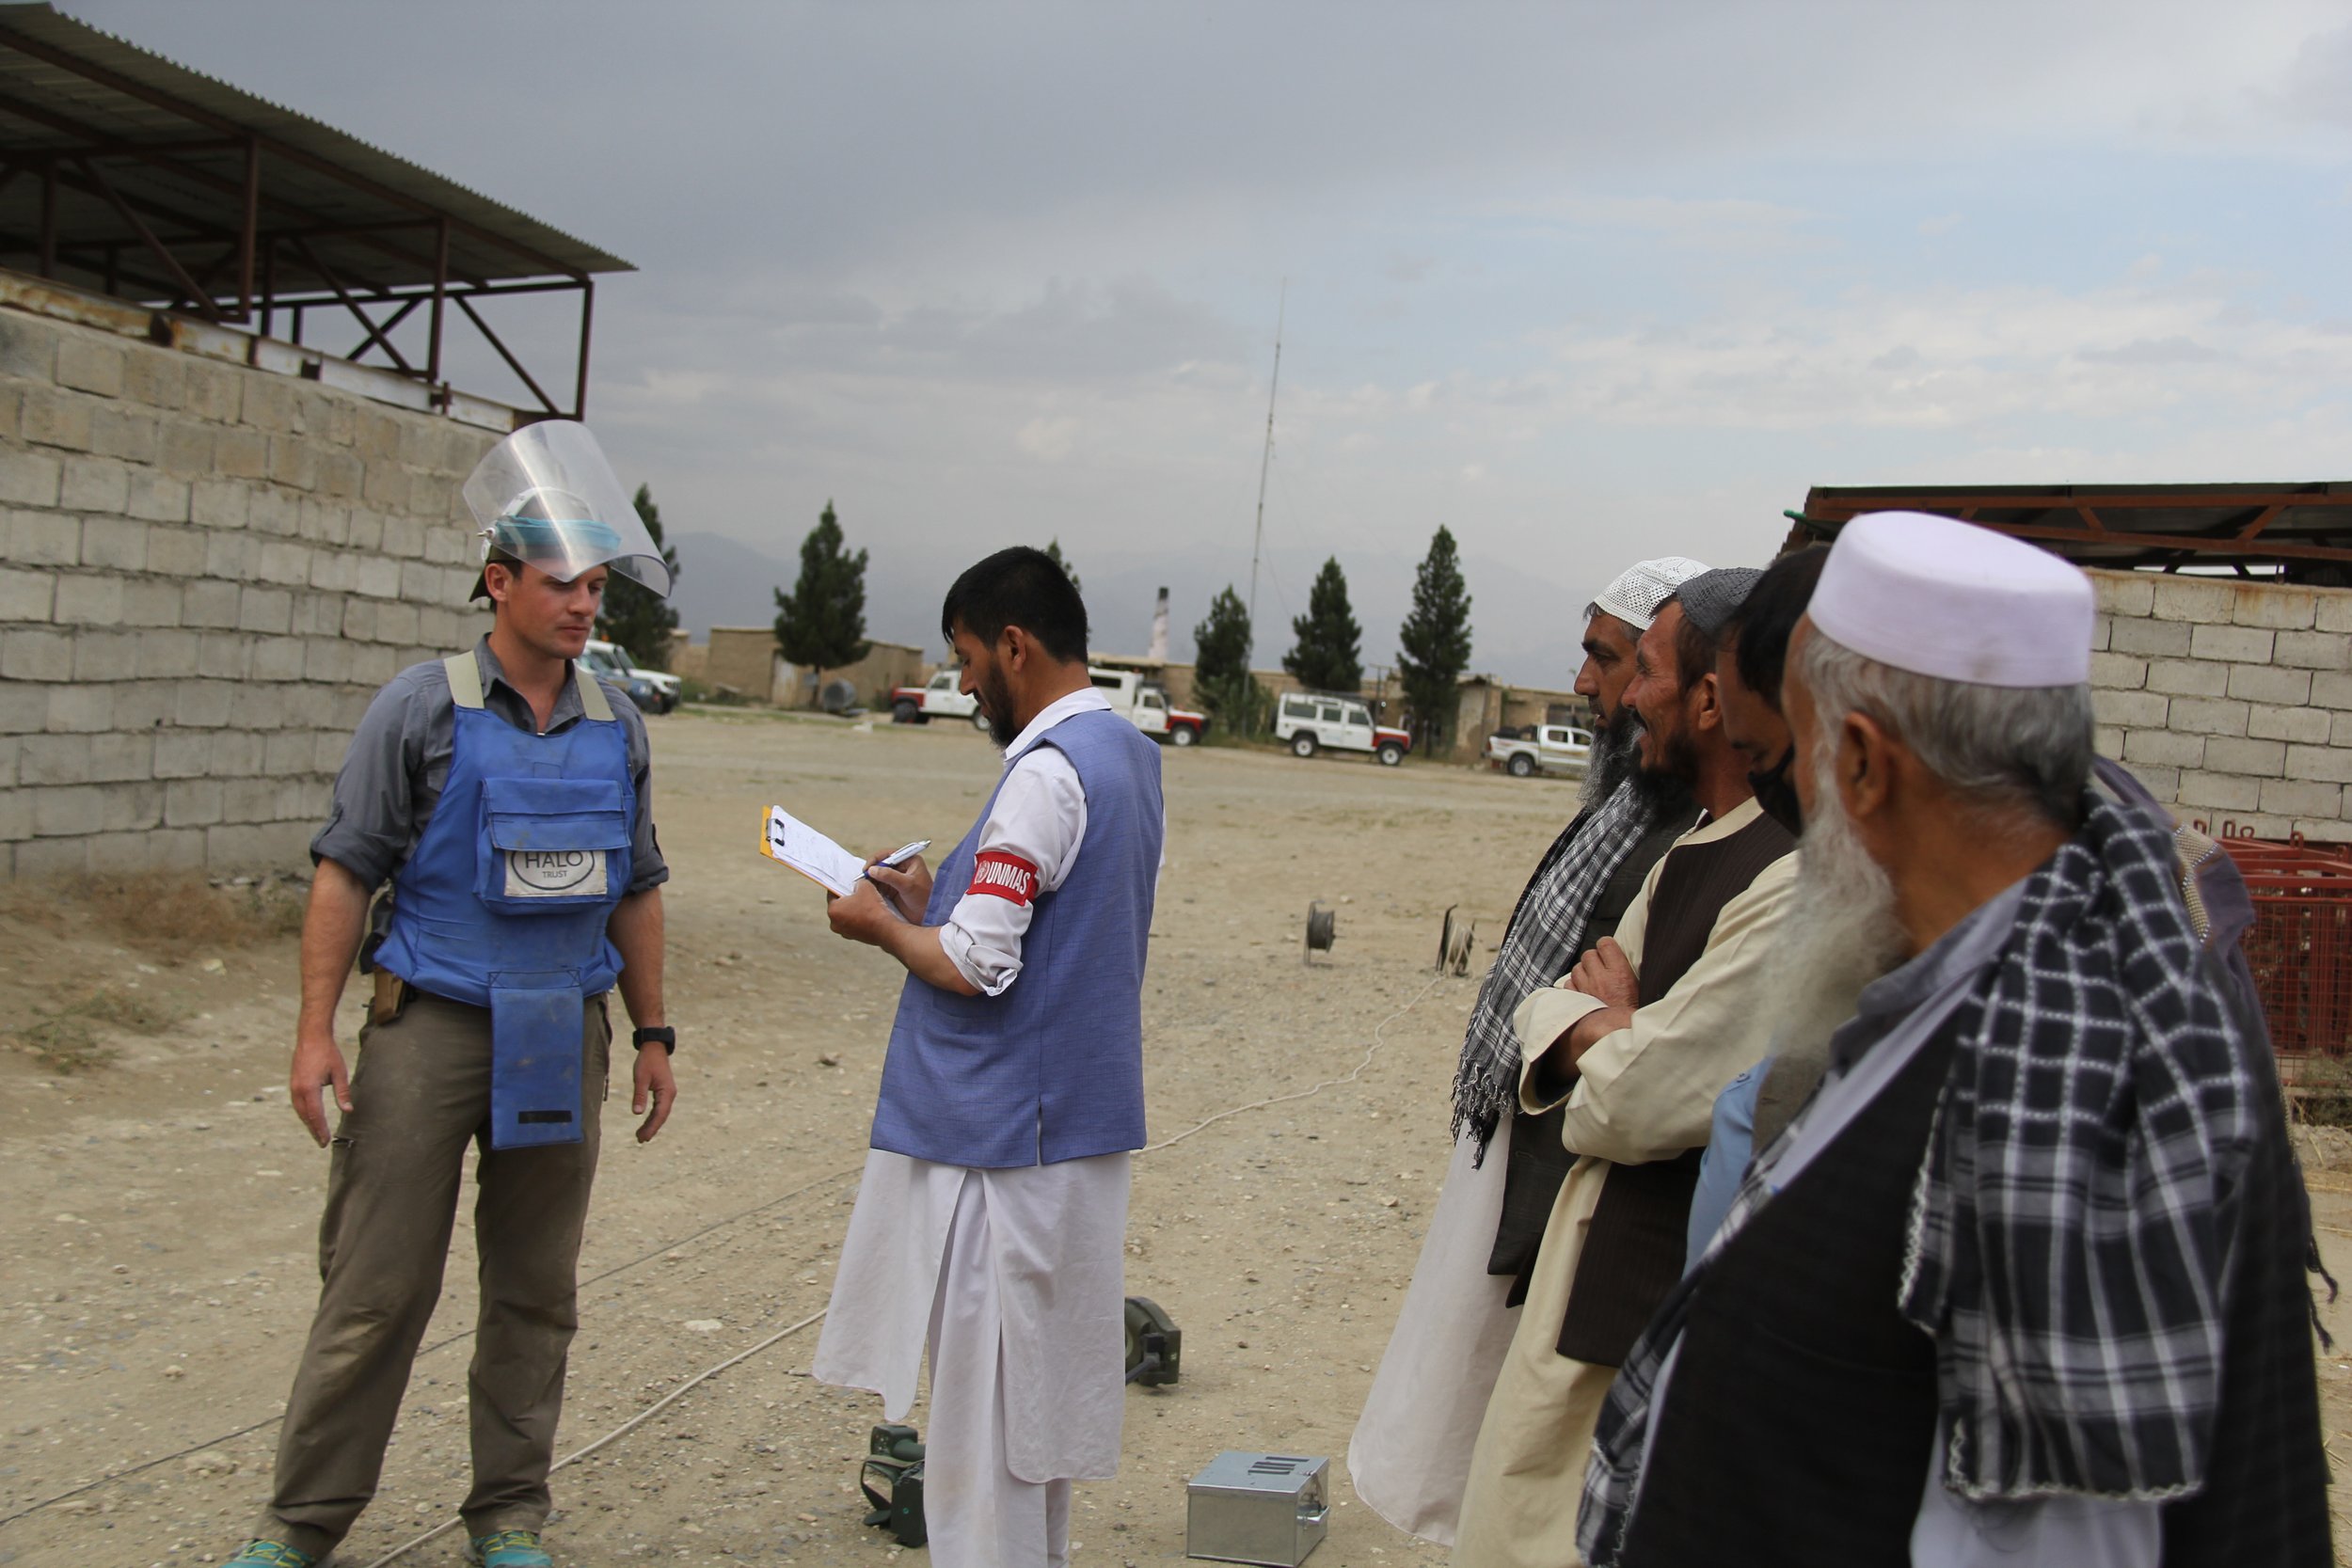  Individuals in a field setting engage in a discussion,  part of an Artios Global training session focused on Explosive Ordnance Disposal (EOD) and related mine action topics. 